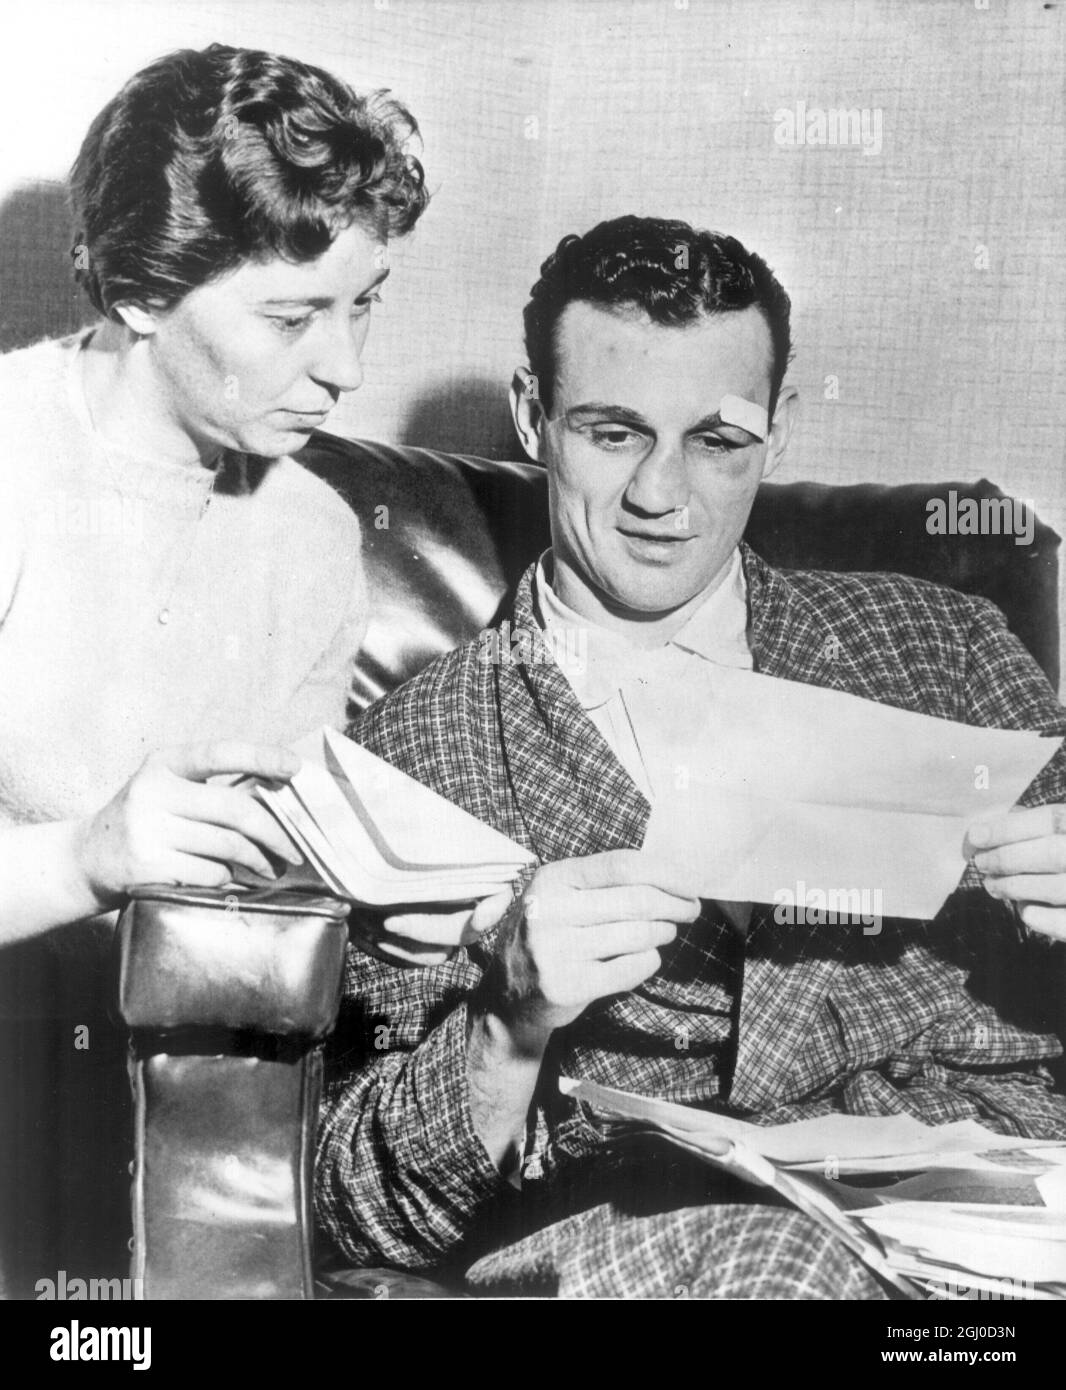 Paul Pender and his wife read congratulatory messages after Pender dethroned Suger Ray Robinson to become the new World Middleweight champion. 23rd January 1960 Stock Photo